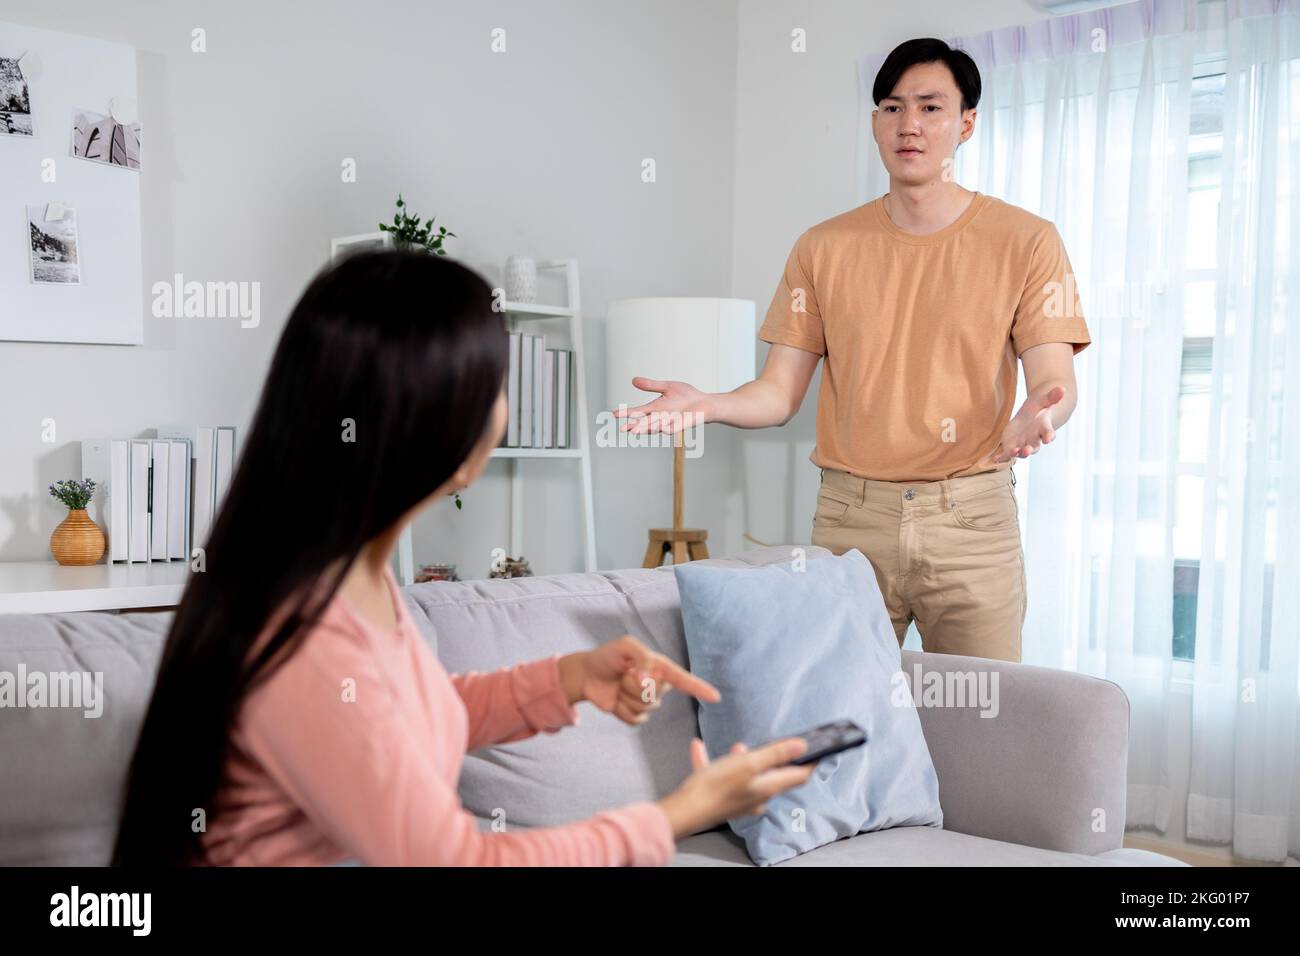 Shocked jealous Asian girlfriend suspecting infidelity by reading text messages on her cheating boyfriend's phone at home. Wife checking husband's smartphone and having jealousy problem Stock Photo